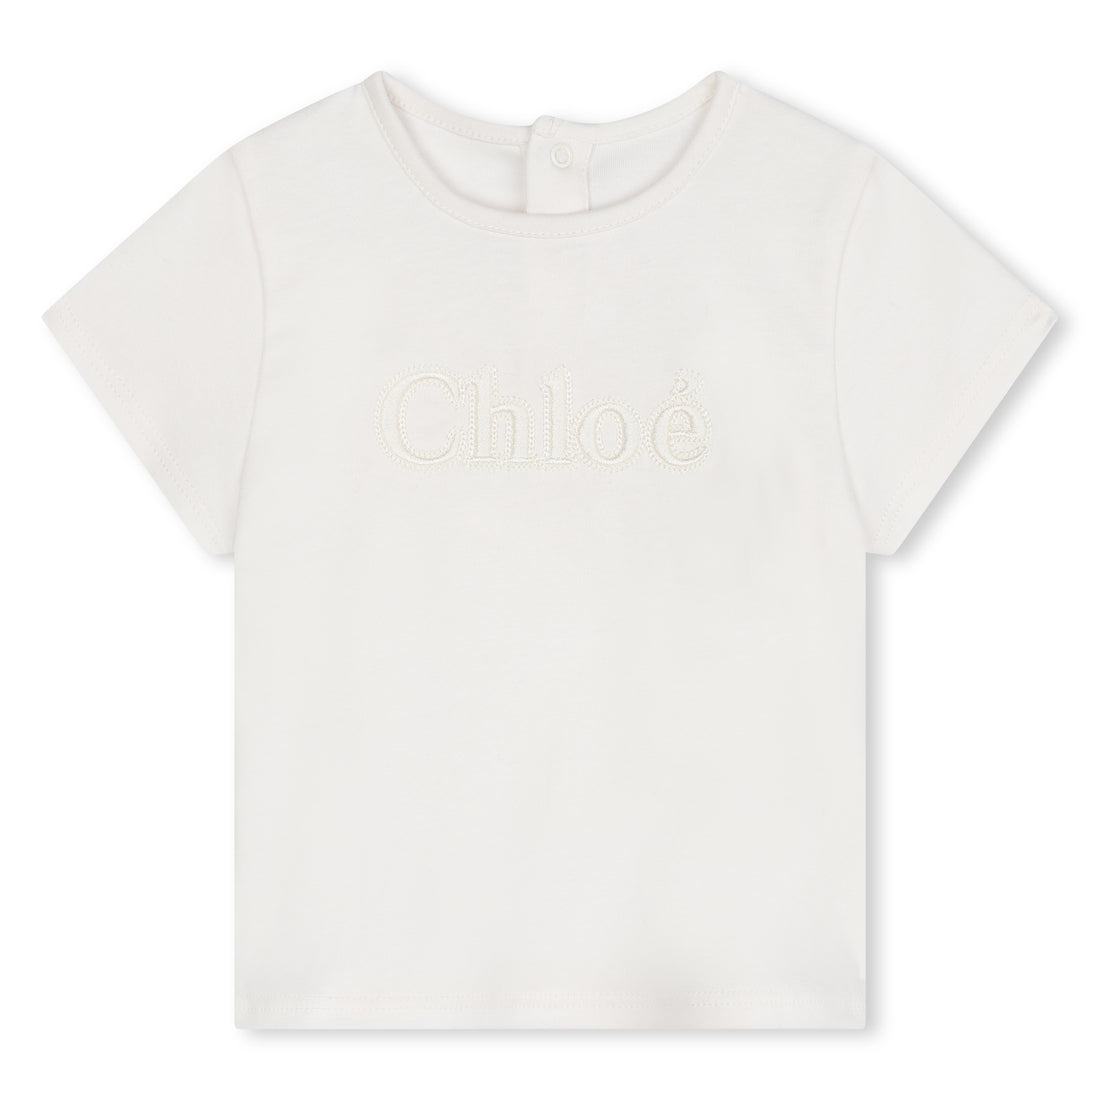 Chloe Short Sleeves Tee-Shirt - Soft and Stylish for Everyday Wear | Schools Out